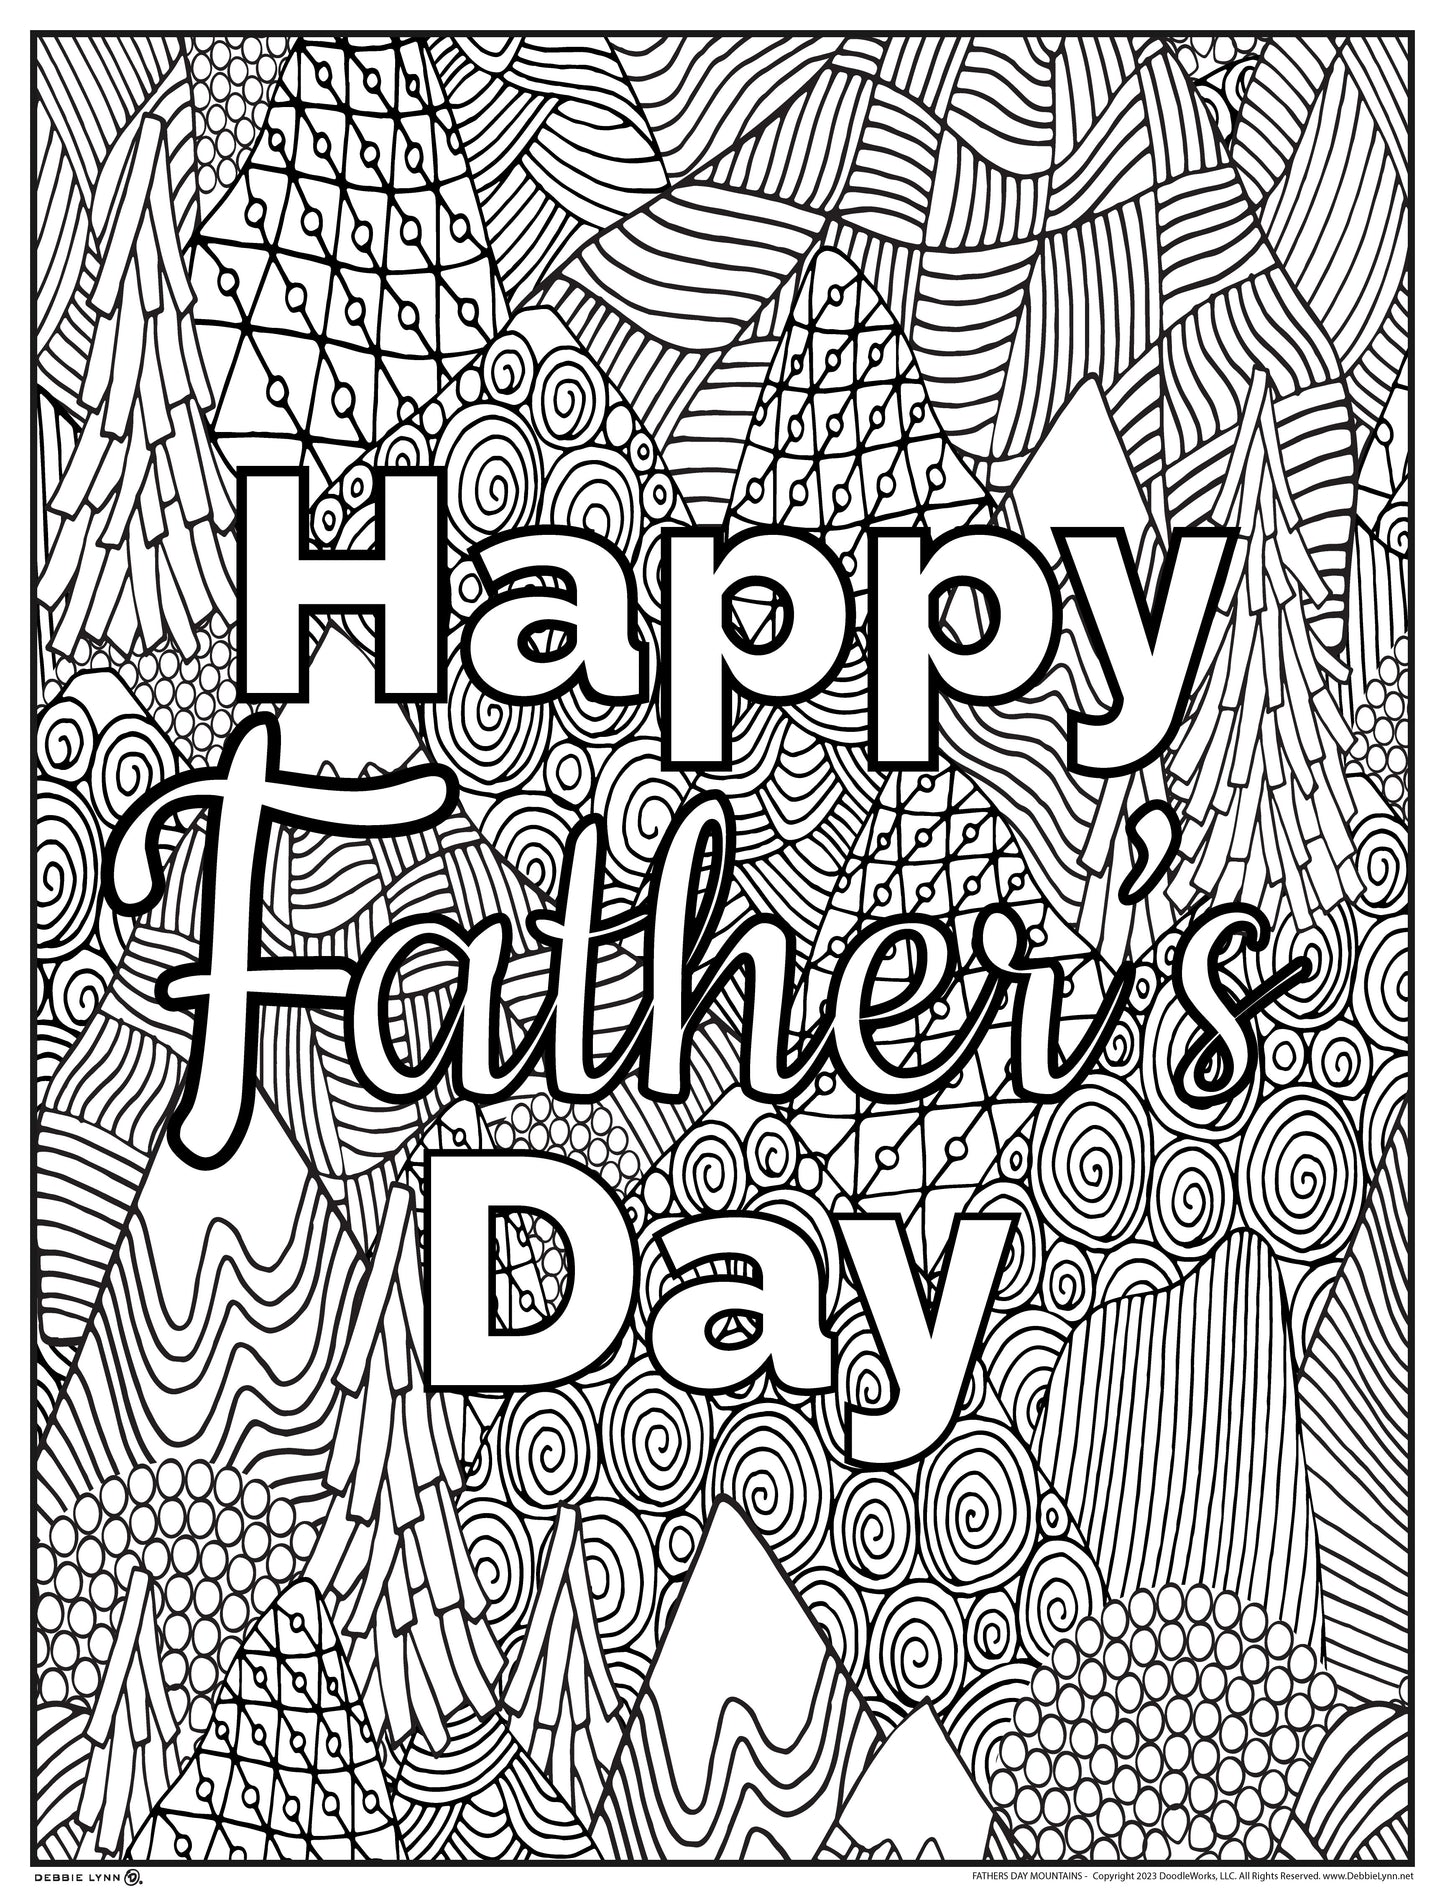 Fathers Day Mountain Personalized Giant Coloring Poster 46"x60"